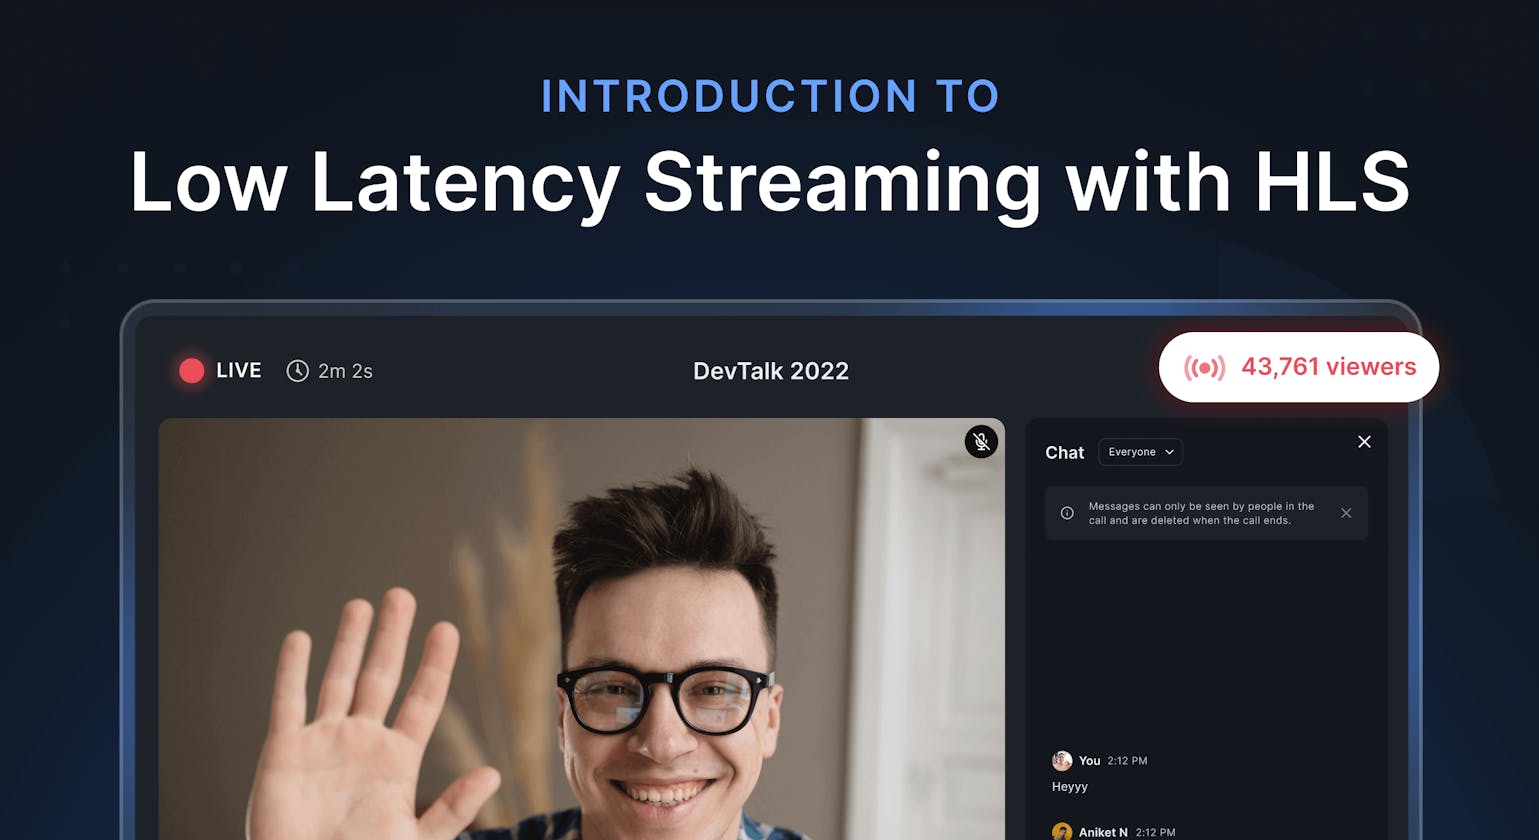 Introduction to Low Latency Streaming with HLS